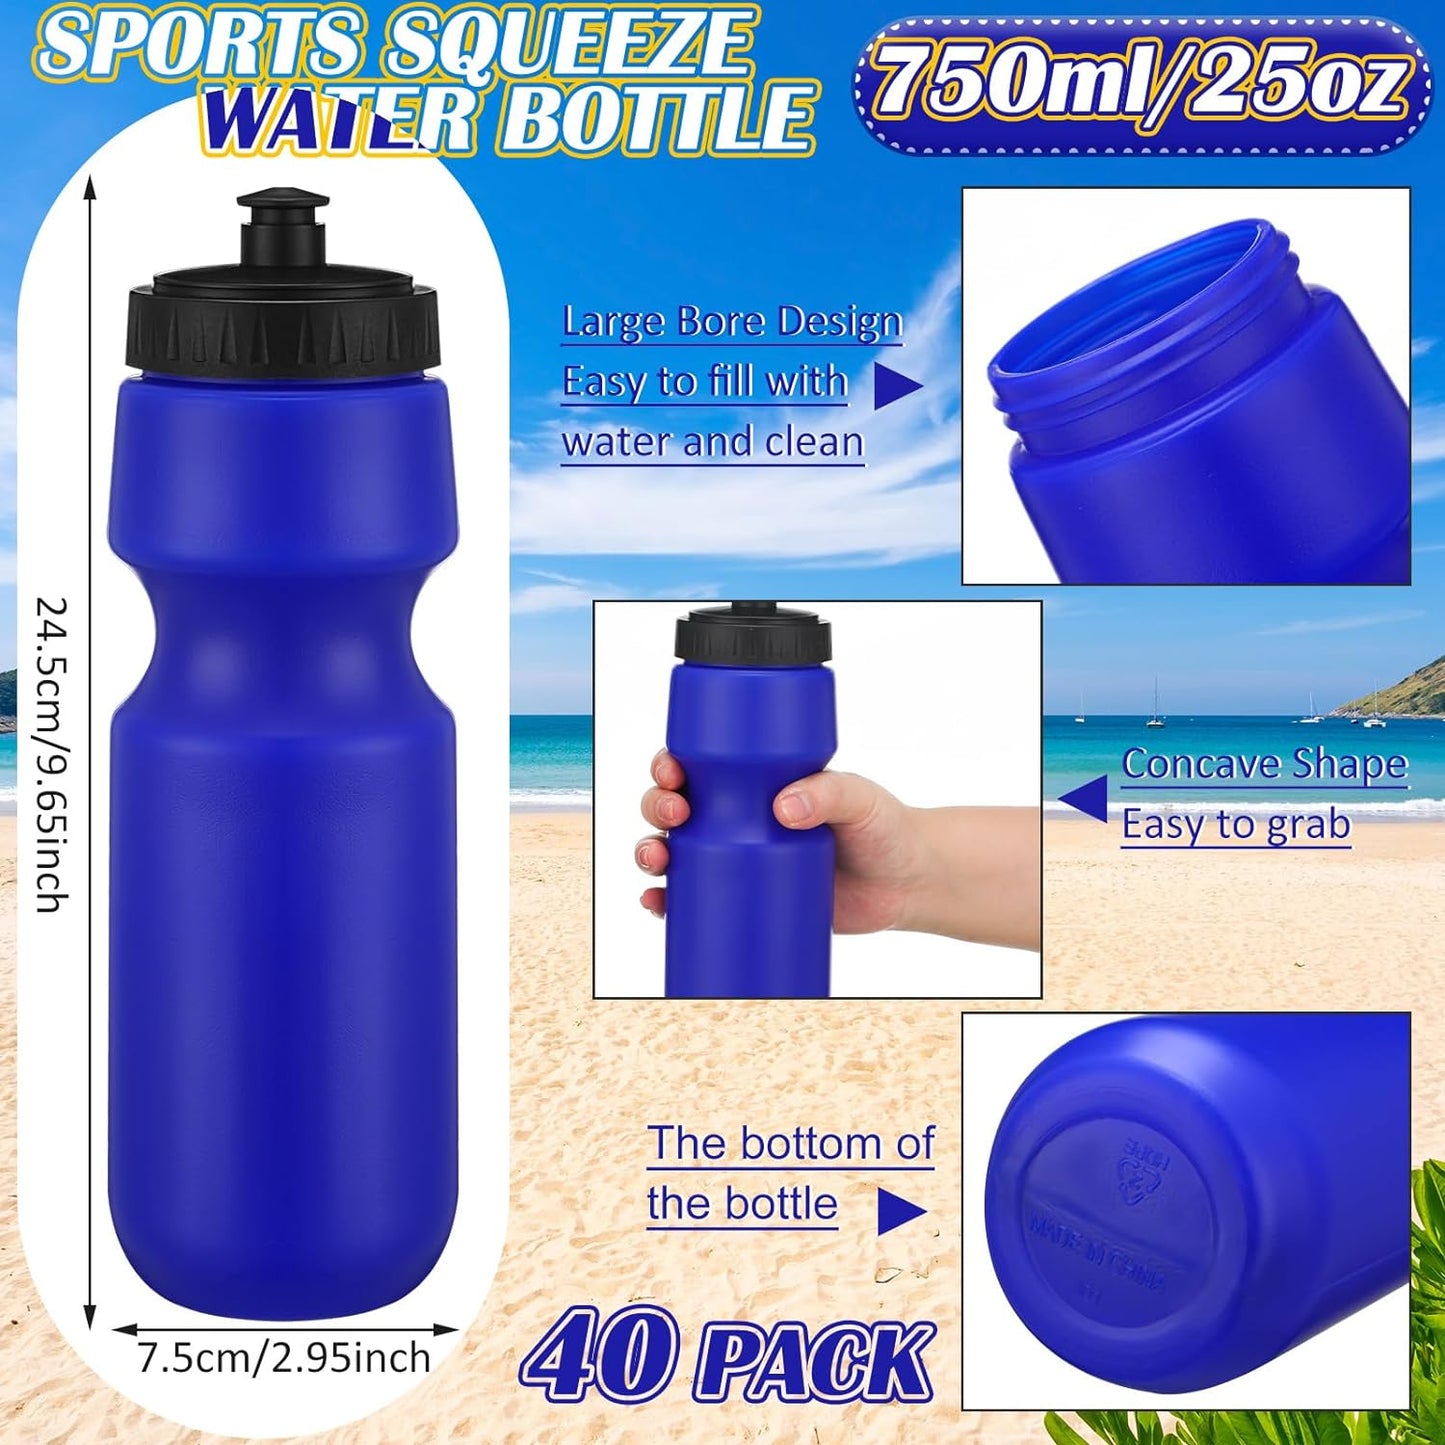 40 Pcs 23 oz Sports Squeeze Water Bottle Bulk Reusable Blank Plastic Water Bottles with Easy Open Push/pull Cap for Bike Bicycles Cycling Fitness Yoga Outdoor Sports Team Competition Namiedstore